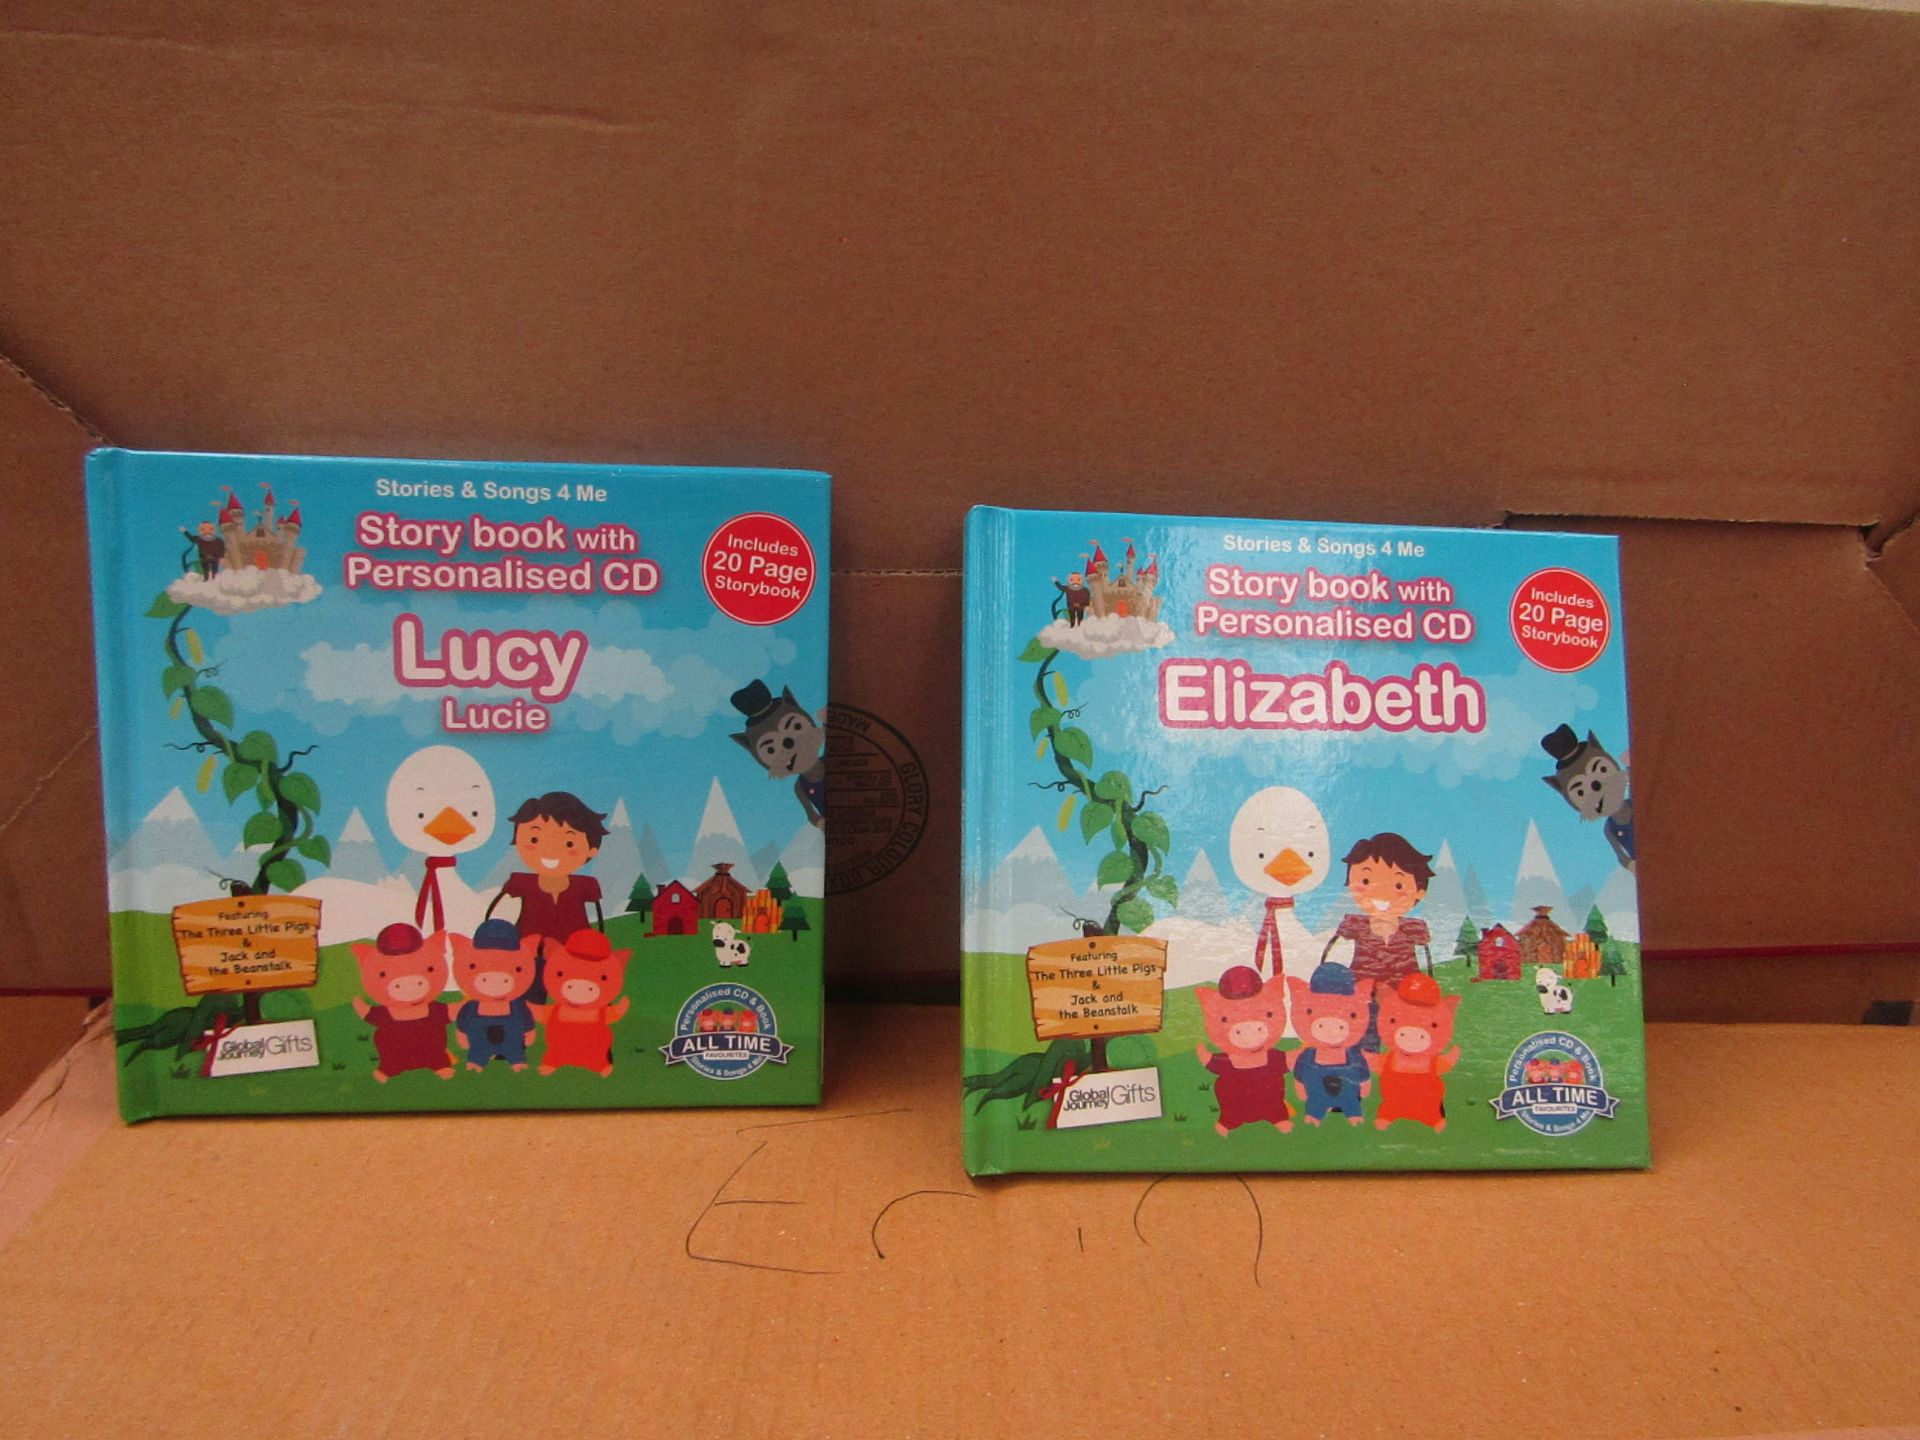 2 x Boxes Containing approx. 100 Per Box - Global - Personalised Story Books ( Include Personalised